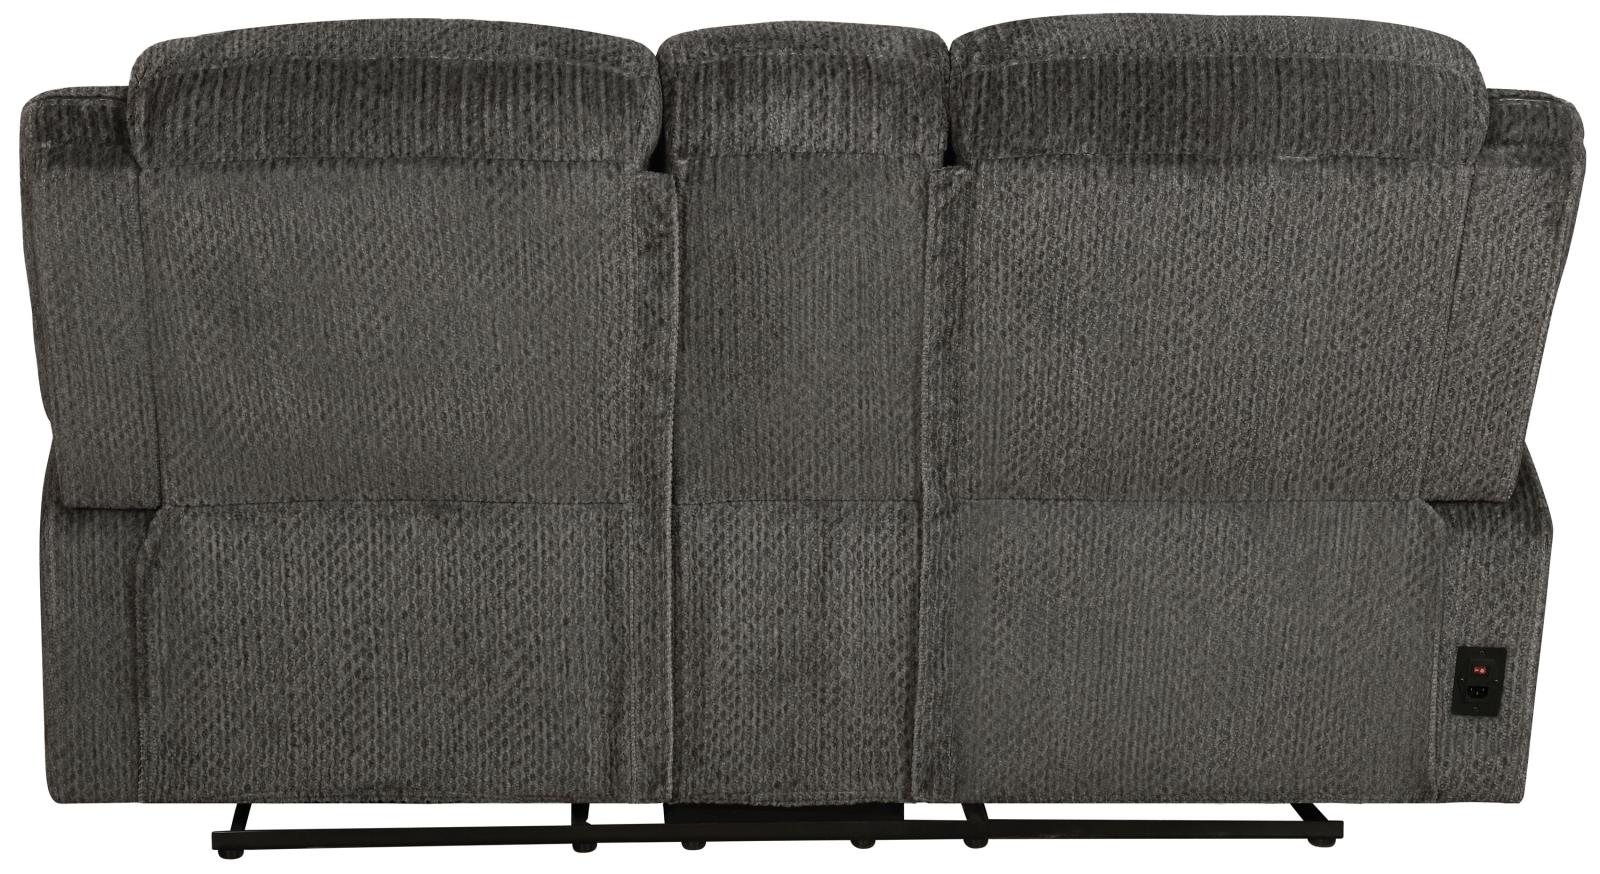 Jennings Upholstered Power Loveseat with Console Charcoal - What A Room